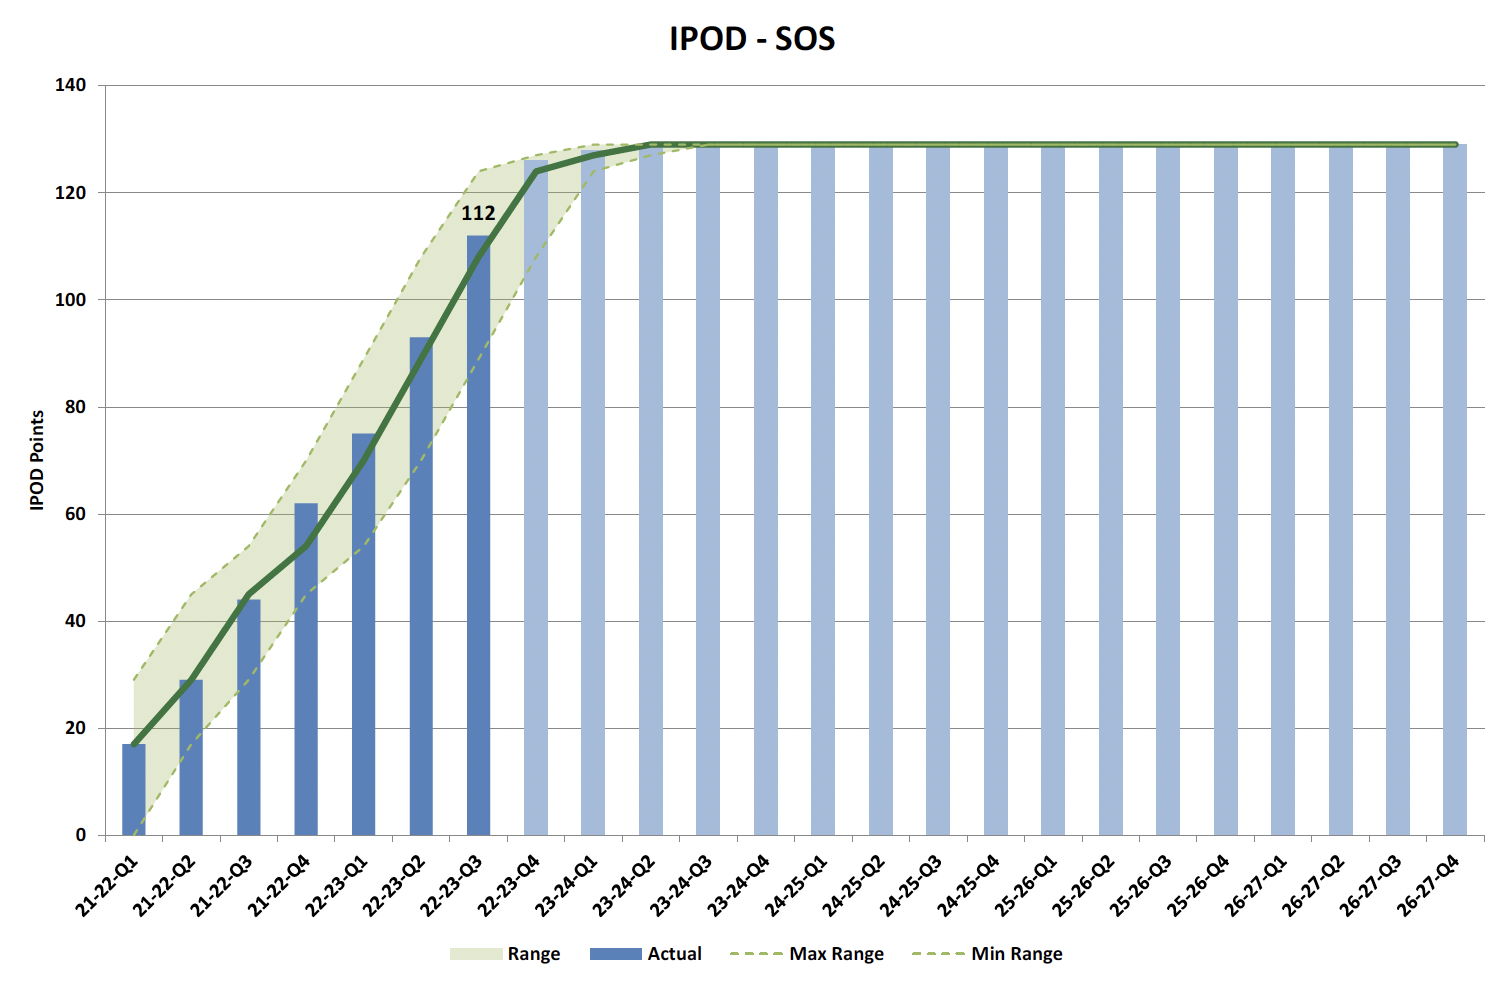  Figure 2 Chart showing IPOD points achieved or forecast for Start on Site milestone against target range for all projects on committed list